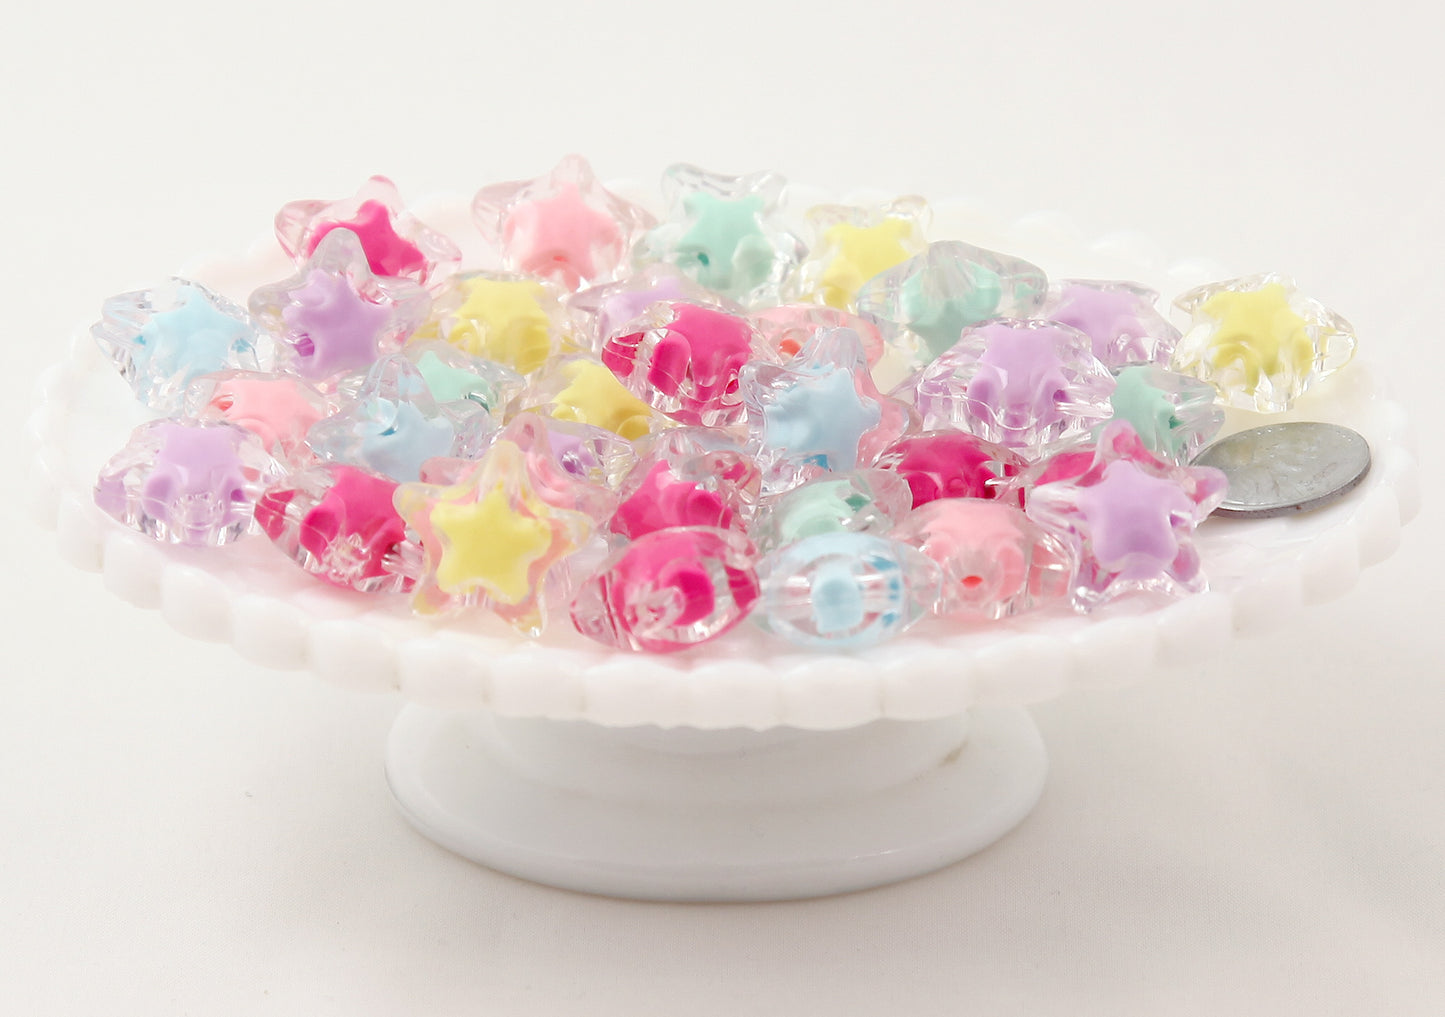 Pastel Star Beads - 20mm Bright Pastel Clear Shooting Star Resin or Acrylic Beads - 20 pc set